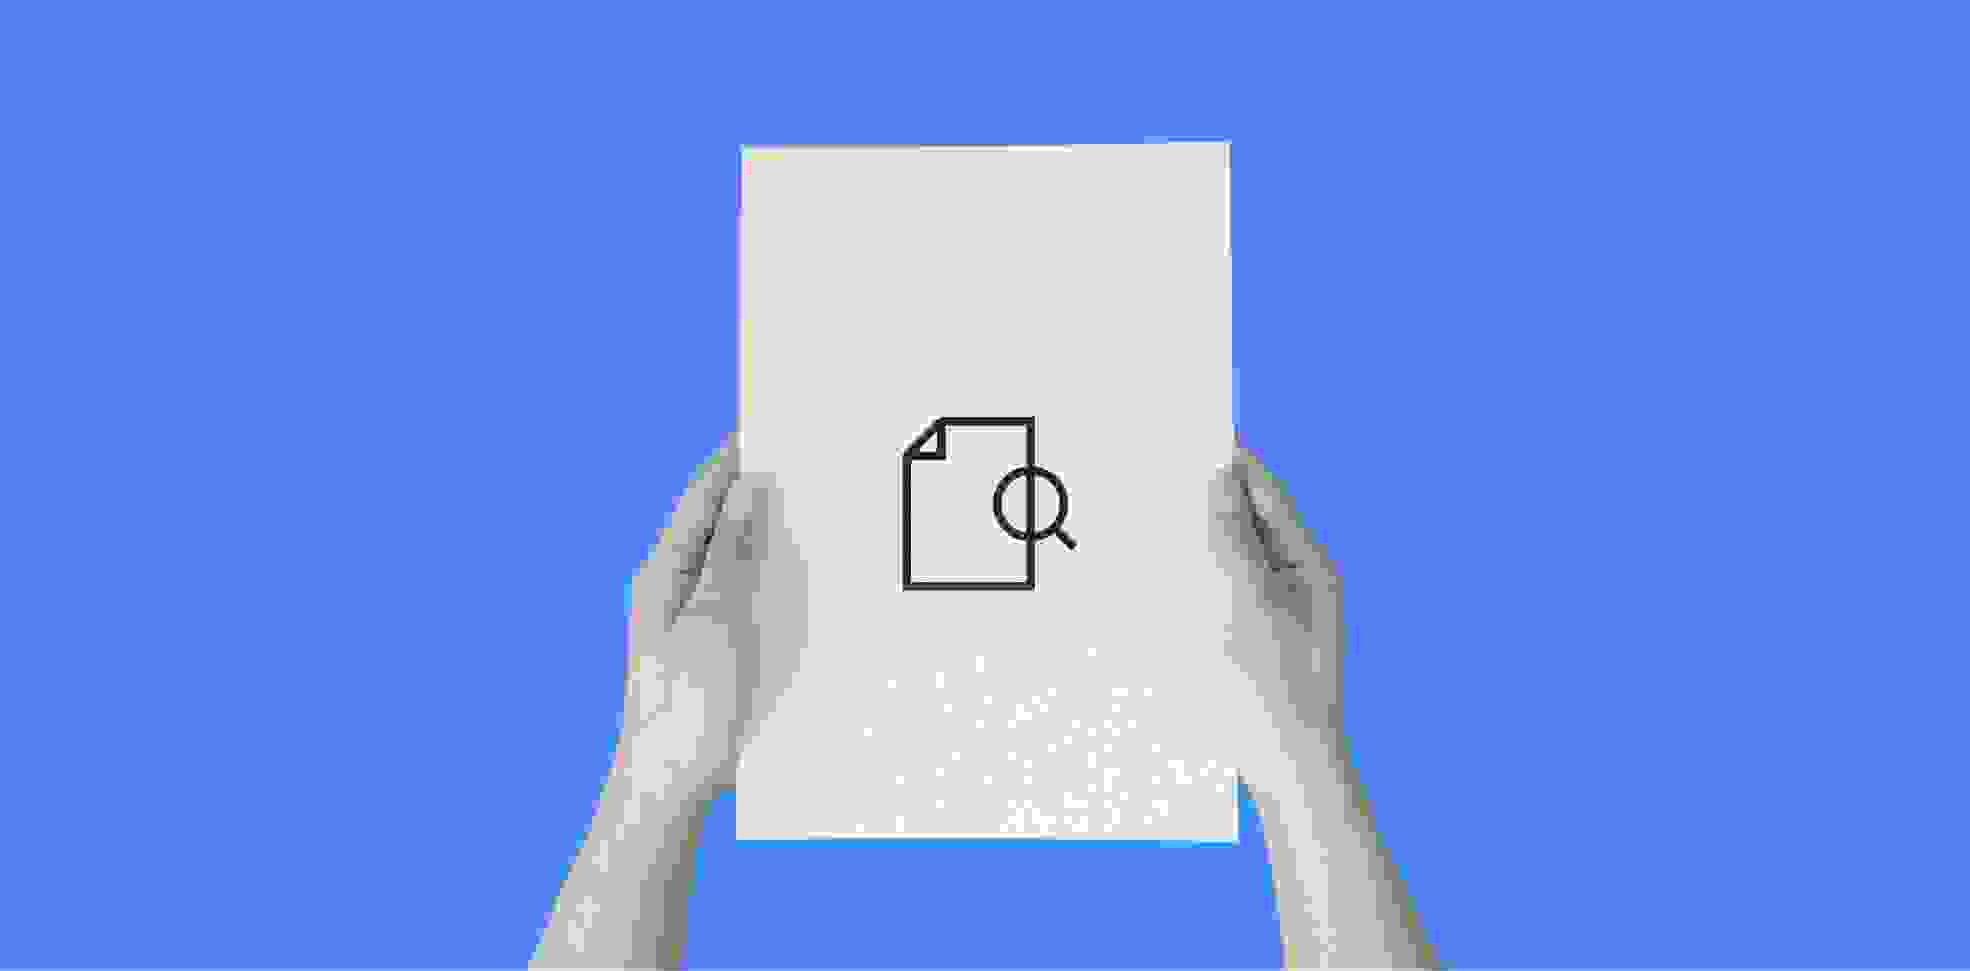 hands holding a sheet of paper with an icon, on a blue background